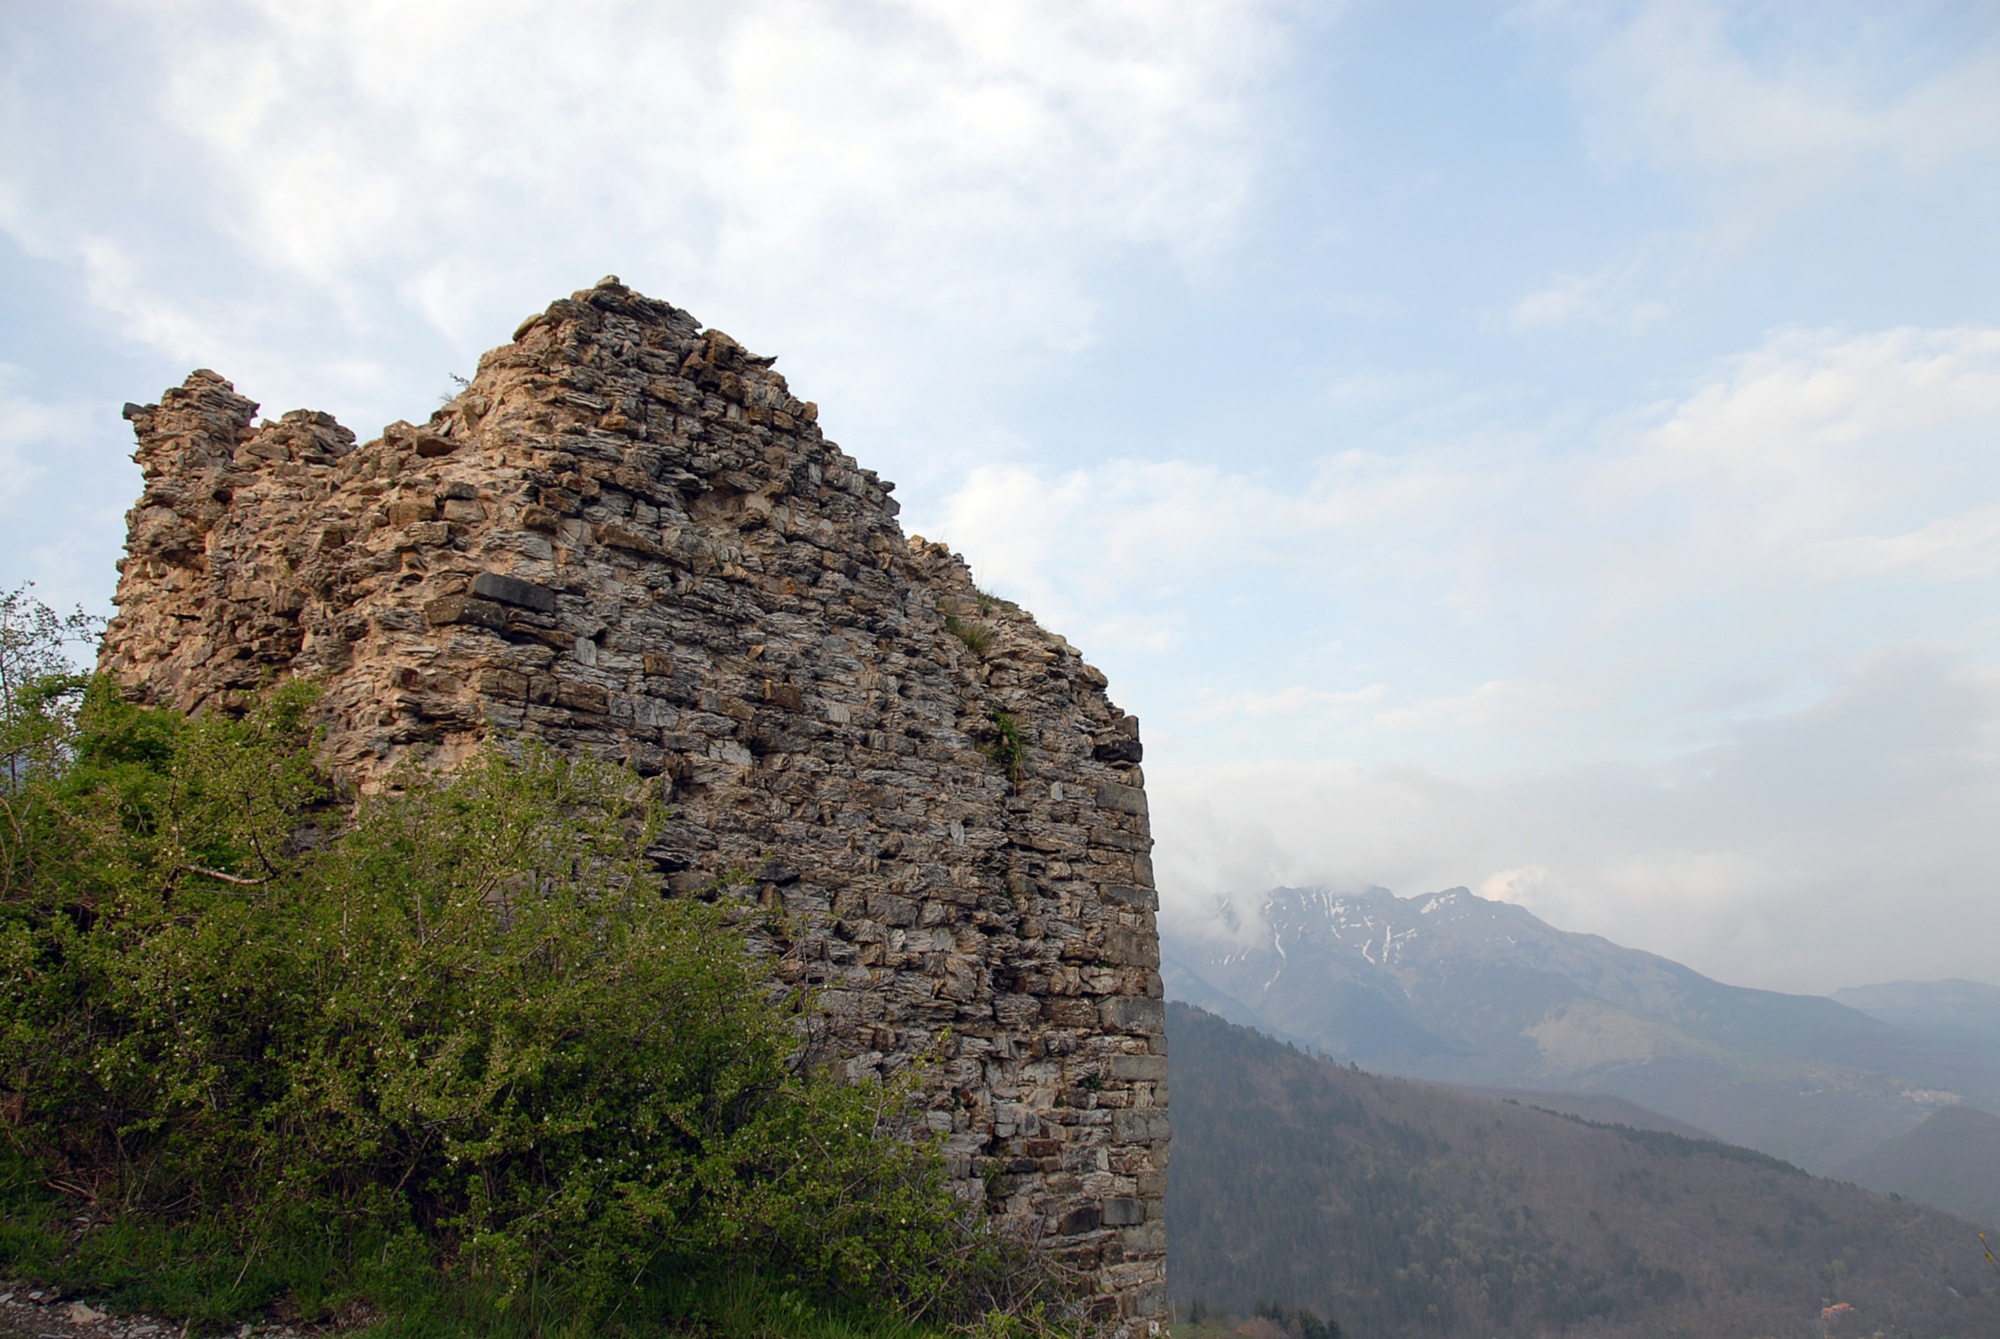 The remains of the castle of Groppo San Pietro